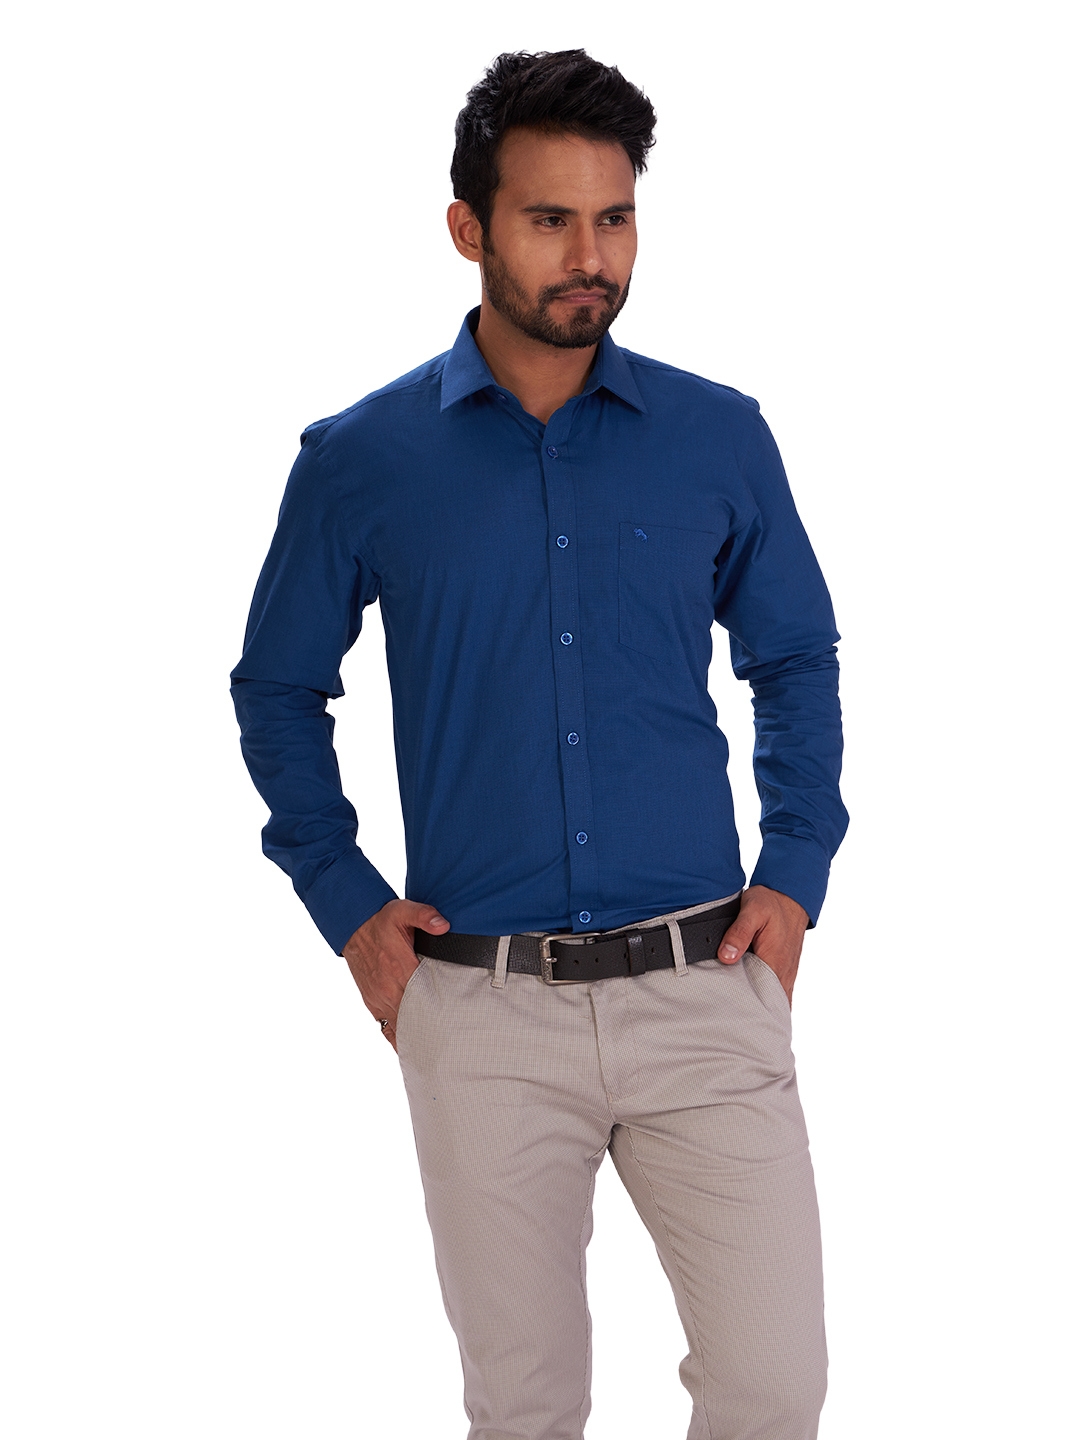 D'cot by Donear | D'cot by Donear Men's Navy Blue Cotton Formal Shirts